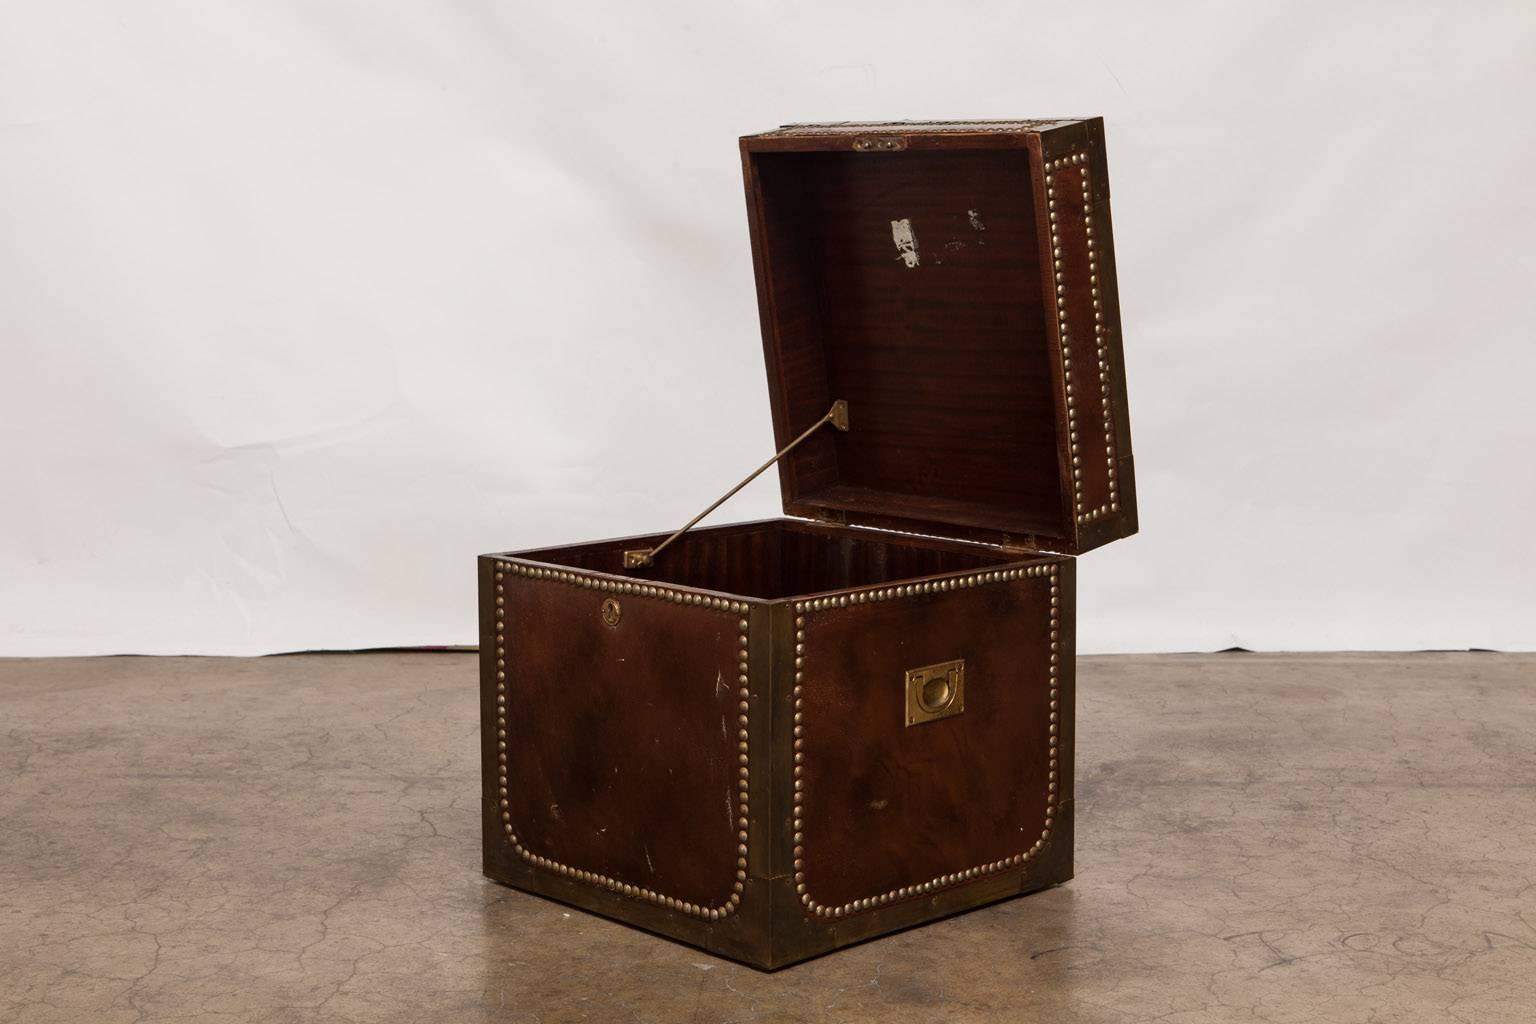 English Regency brass and leather Campaign style box featuring brass nailhead trim and strapping. Opens for storage and has a hinged lid with brass hardware and a mahogany interior. Brass Campaign handles on each side and clad in brown leather.